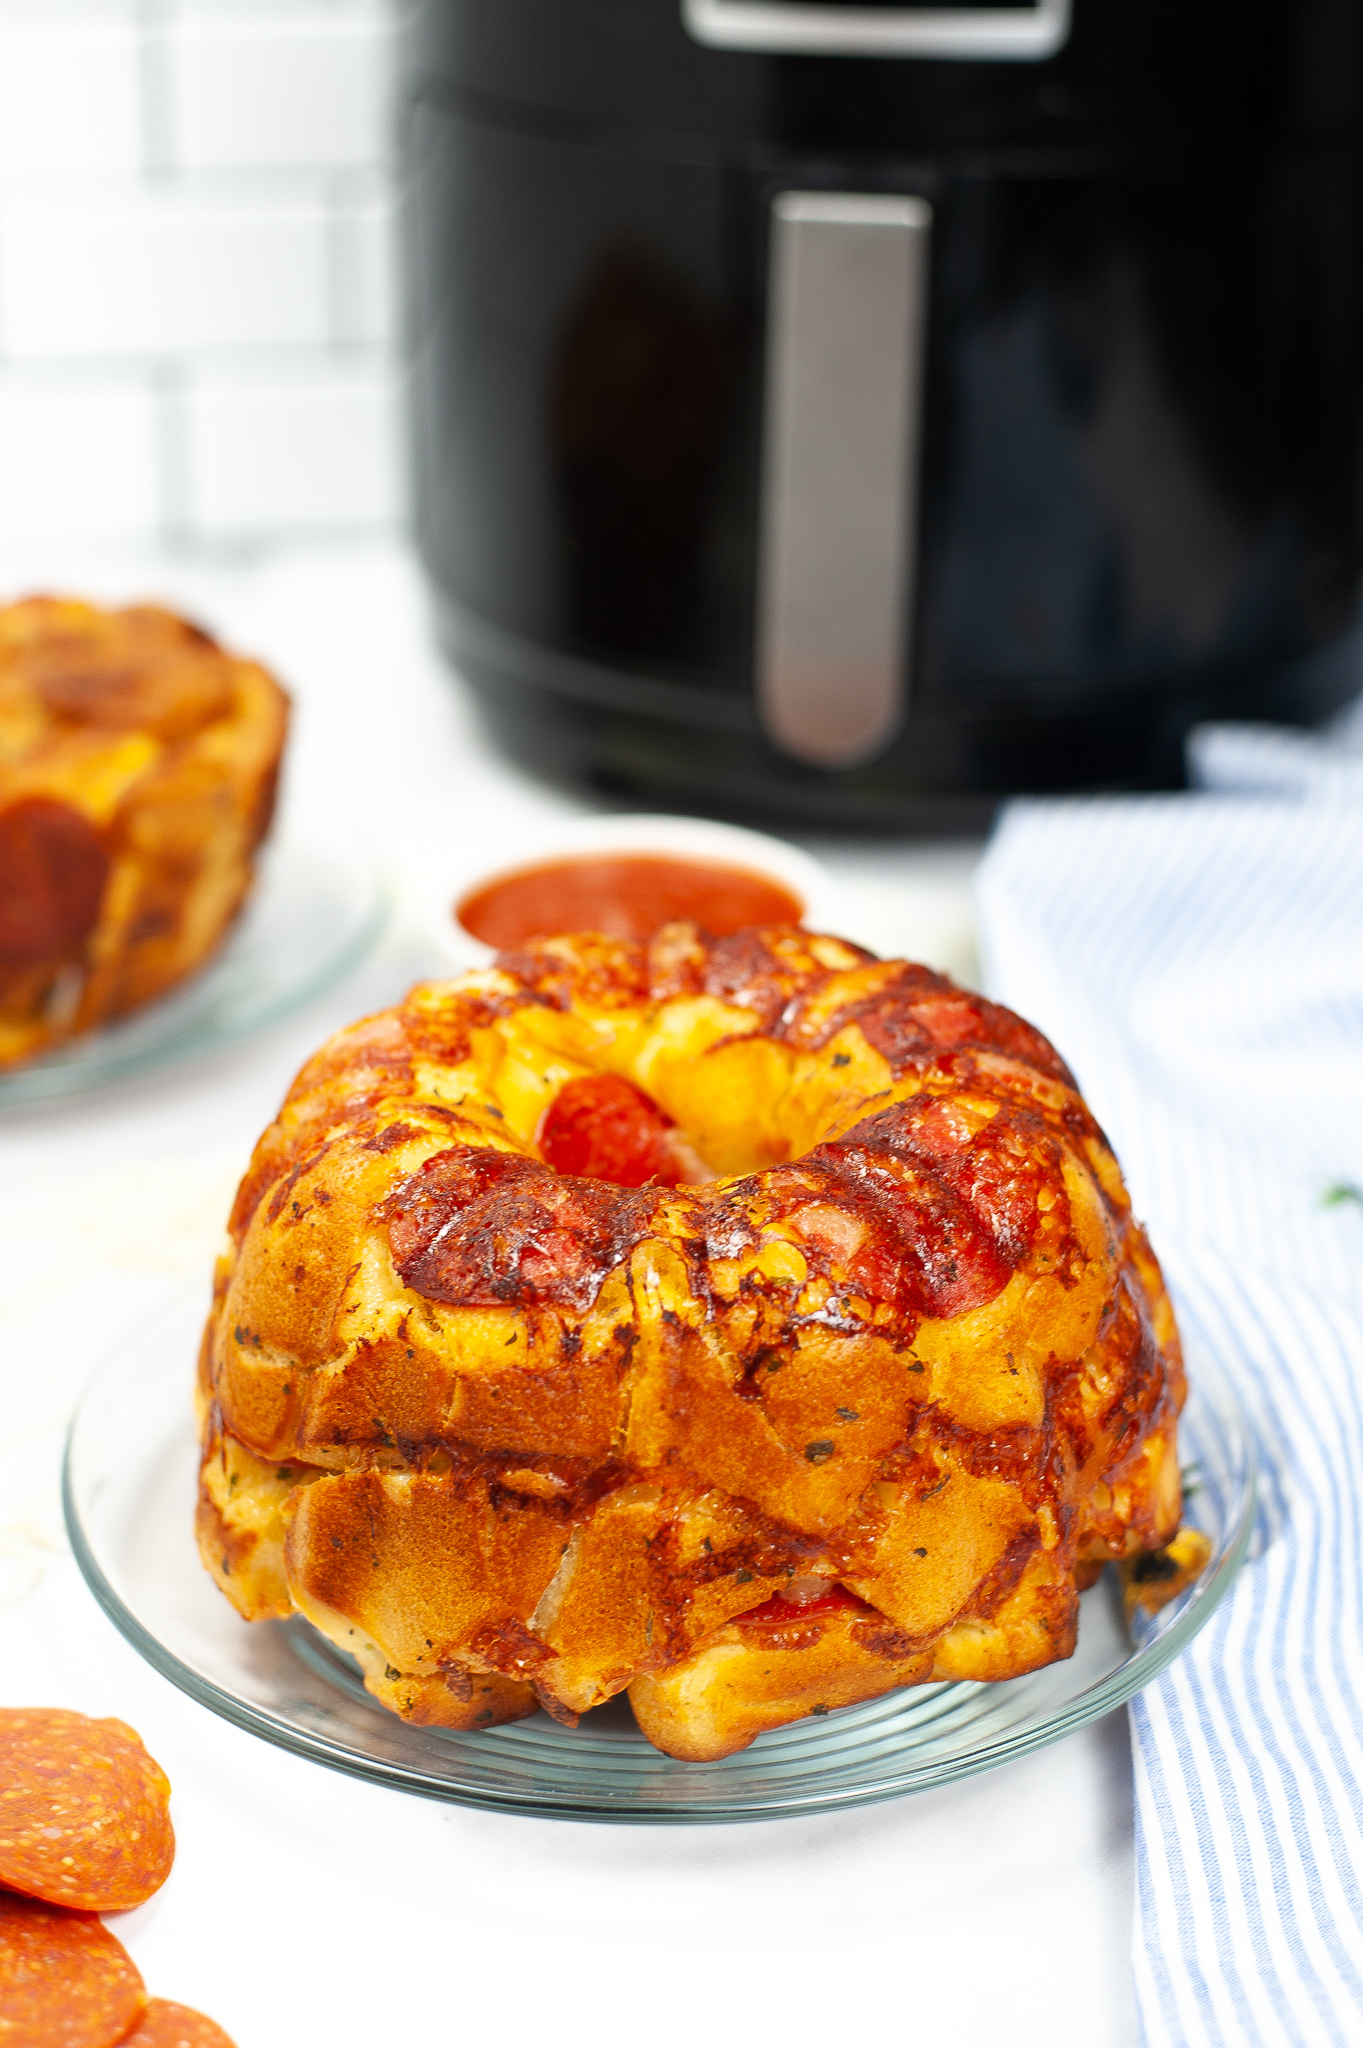 Clear dish of Pizza bread with an air fryer in the background.